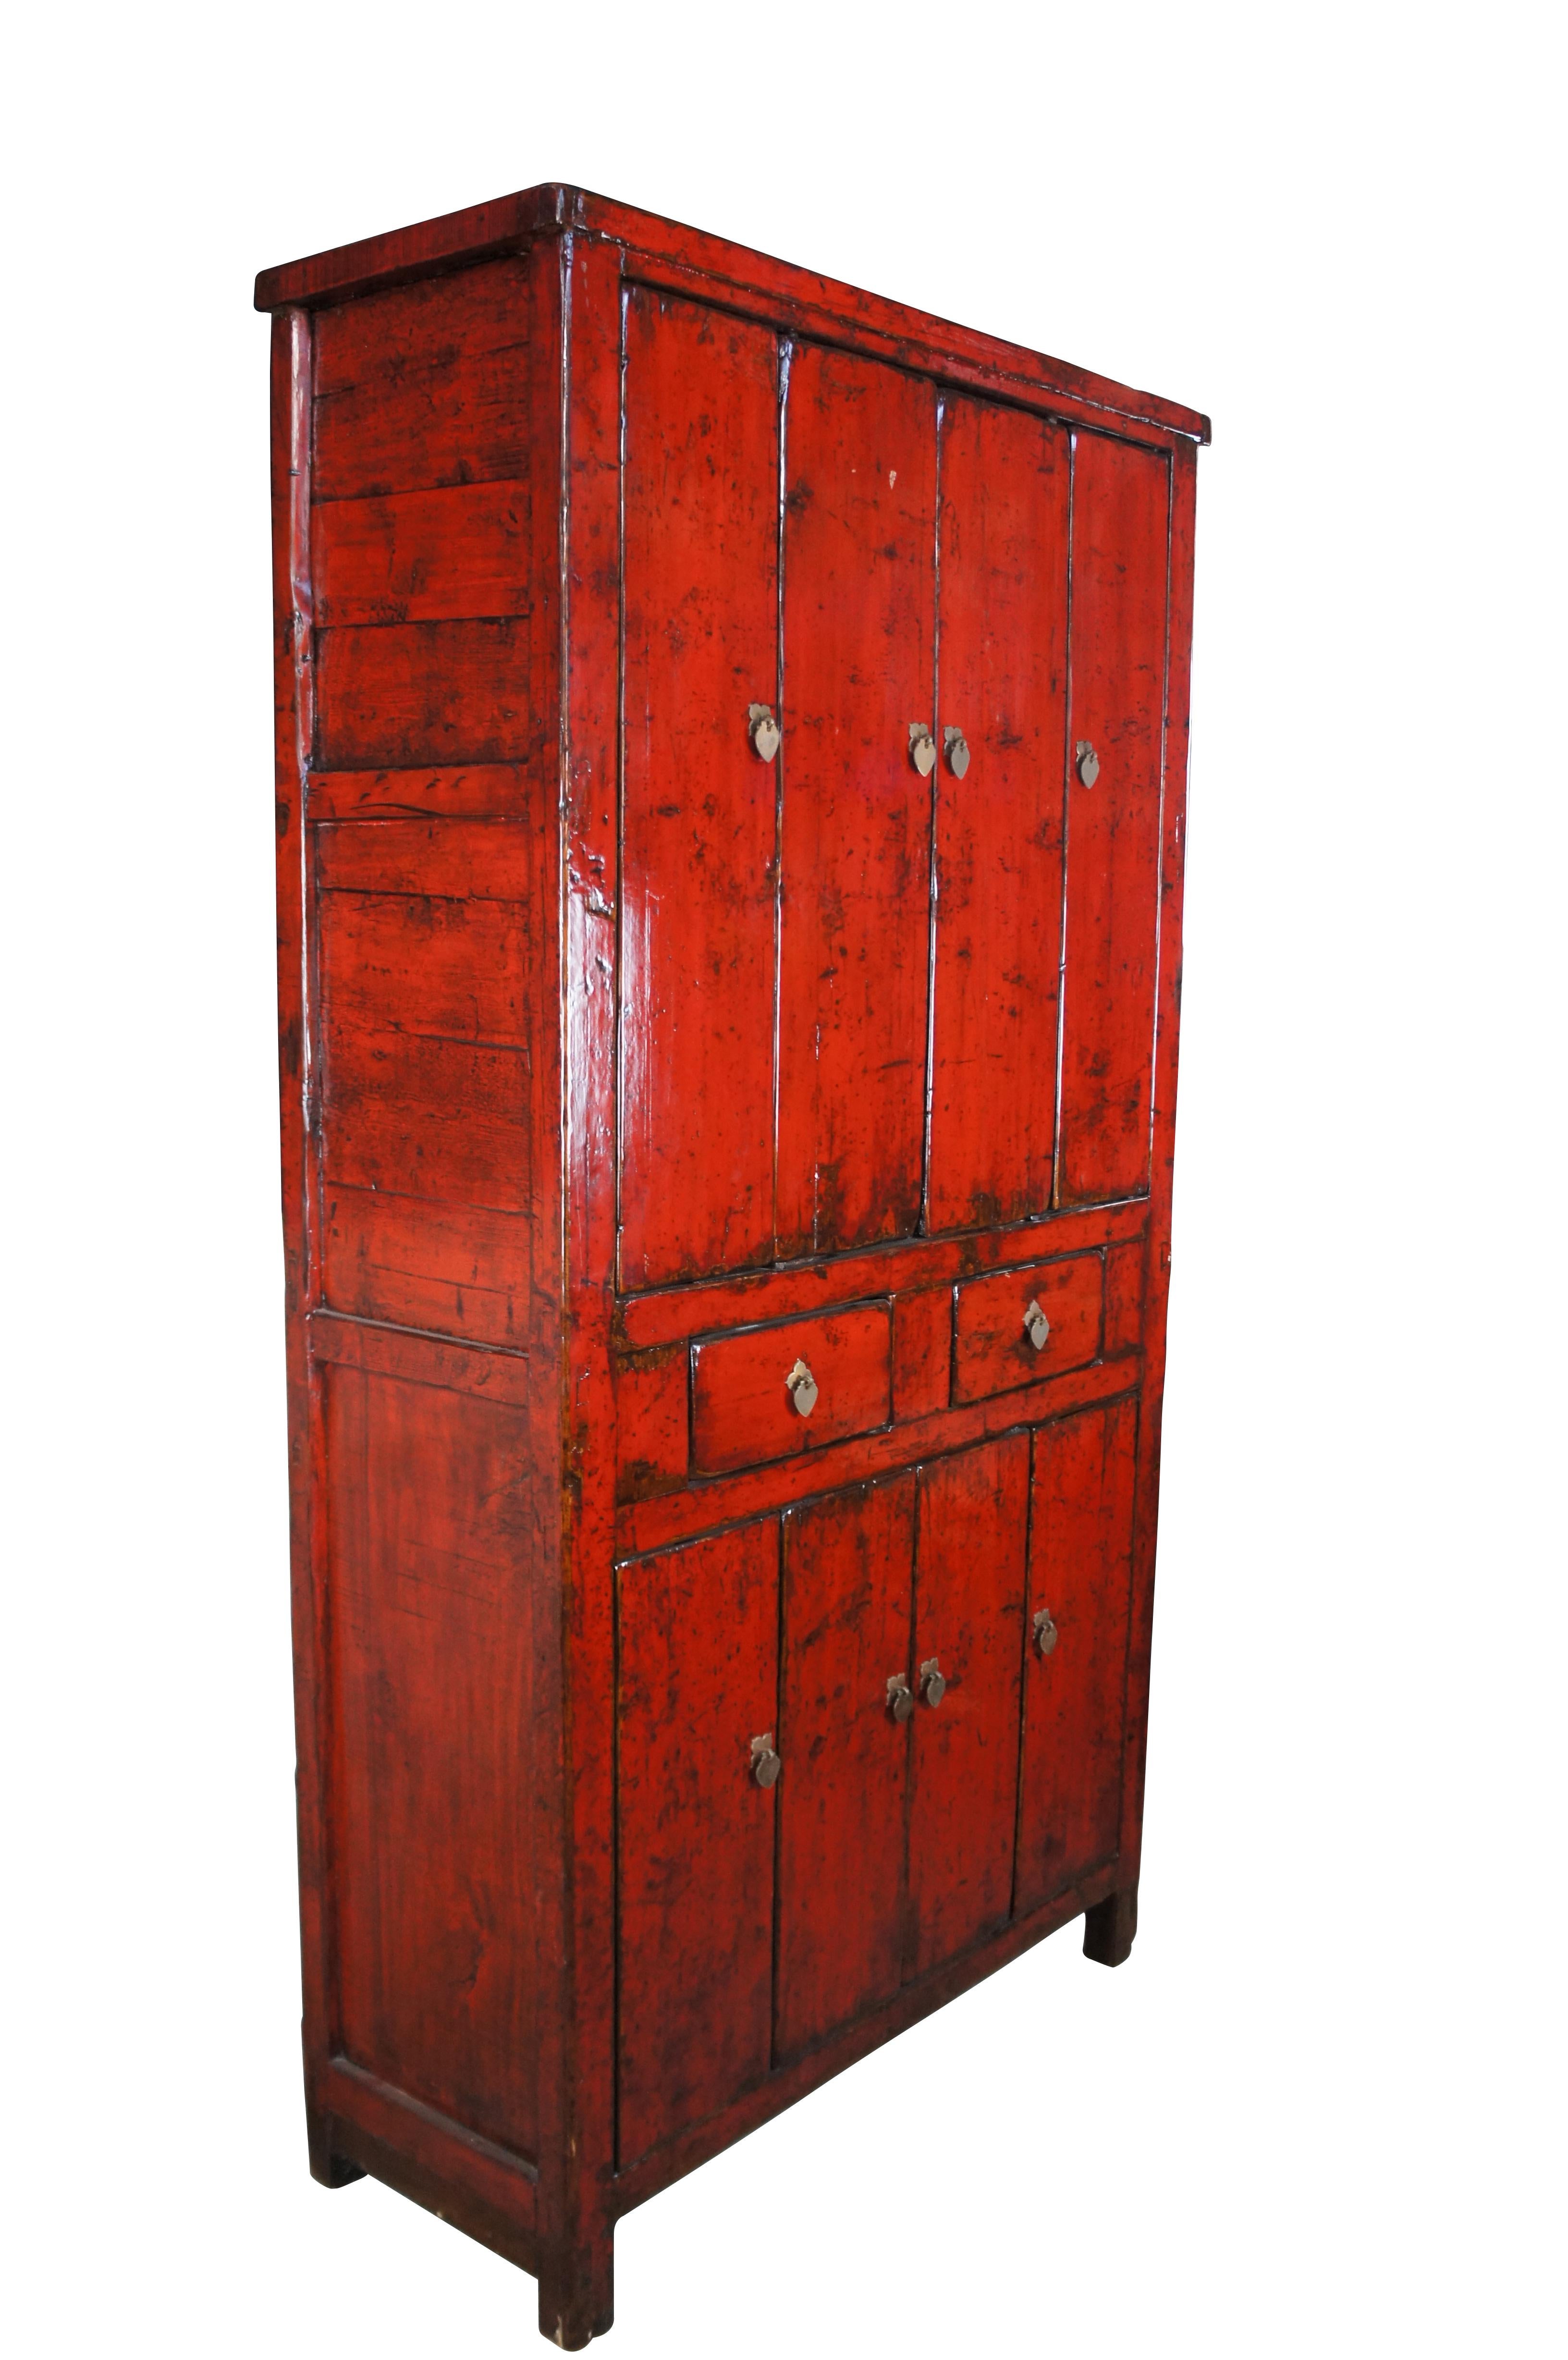 Chinoiserie Antique 19th C. Chinese Red Lacquer Elm Armoire Wardrobe Linen Press Cabinet 89